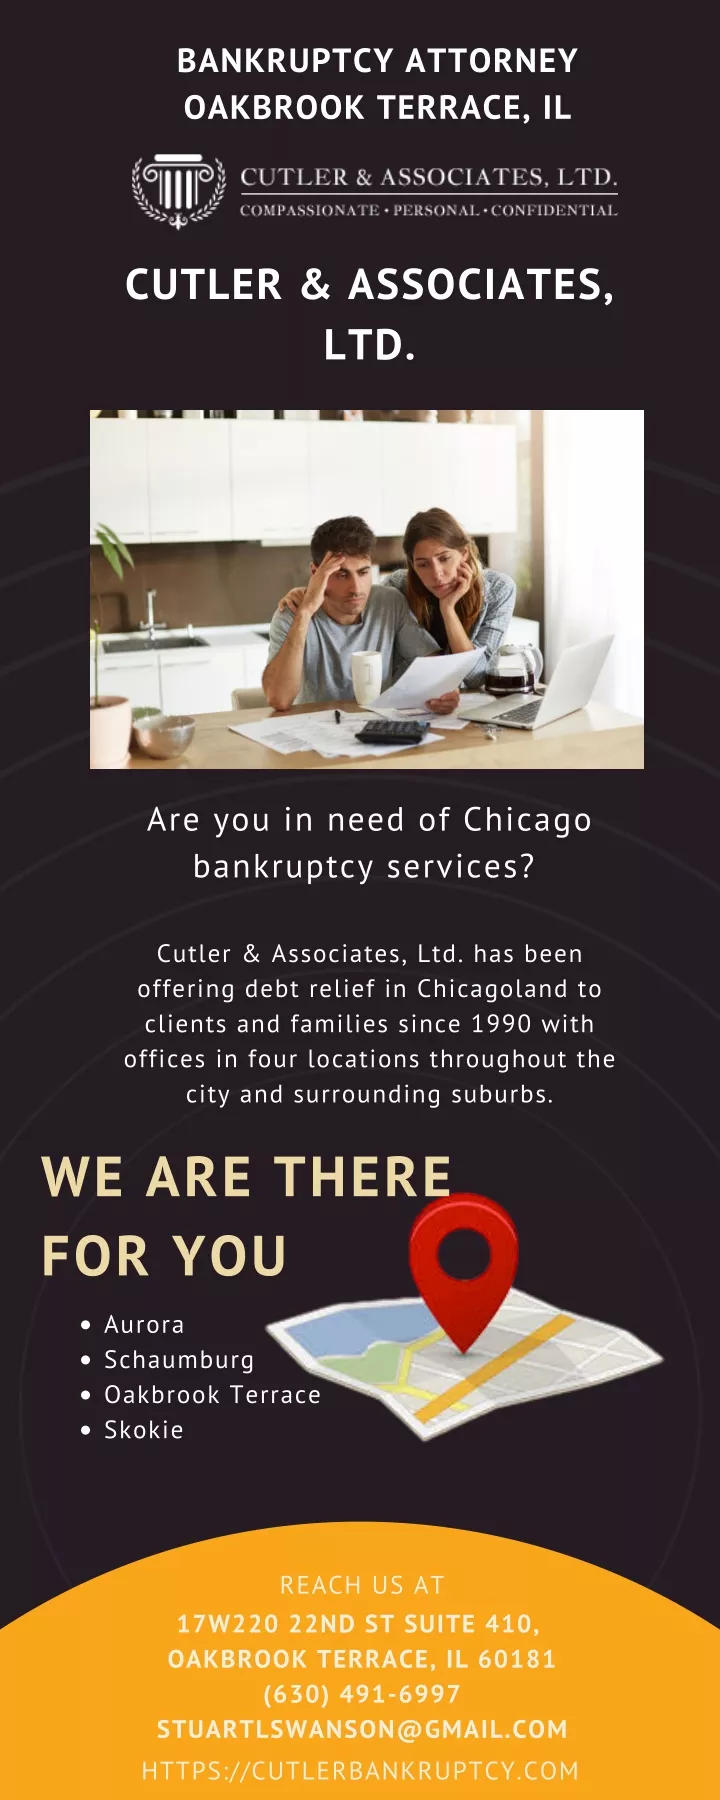 bankruptcy attorney oakbrook terrace il